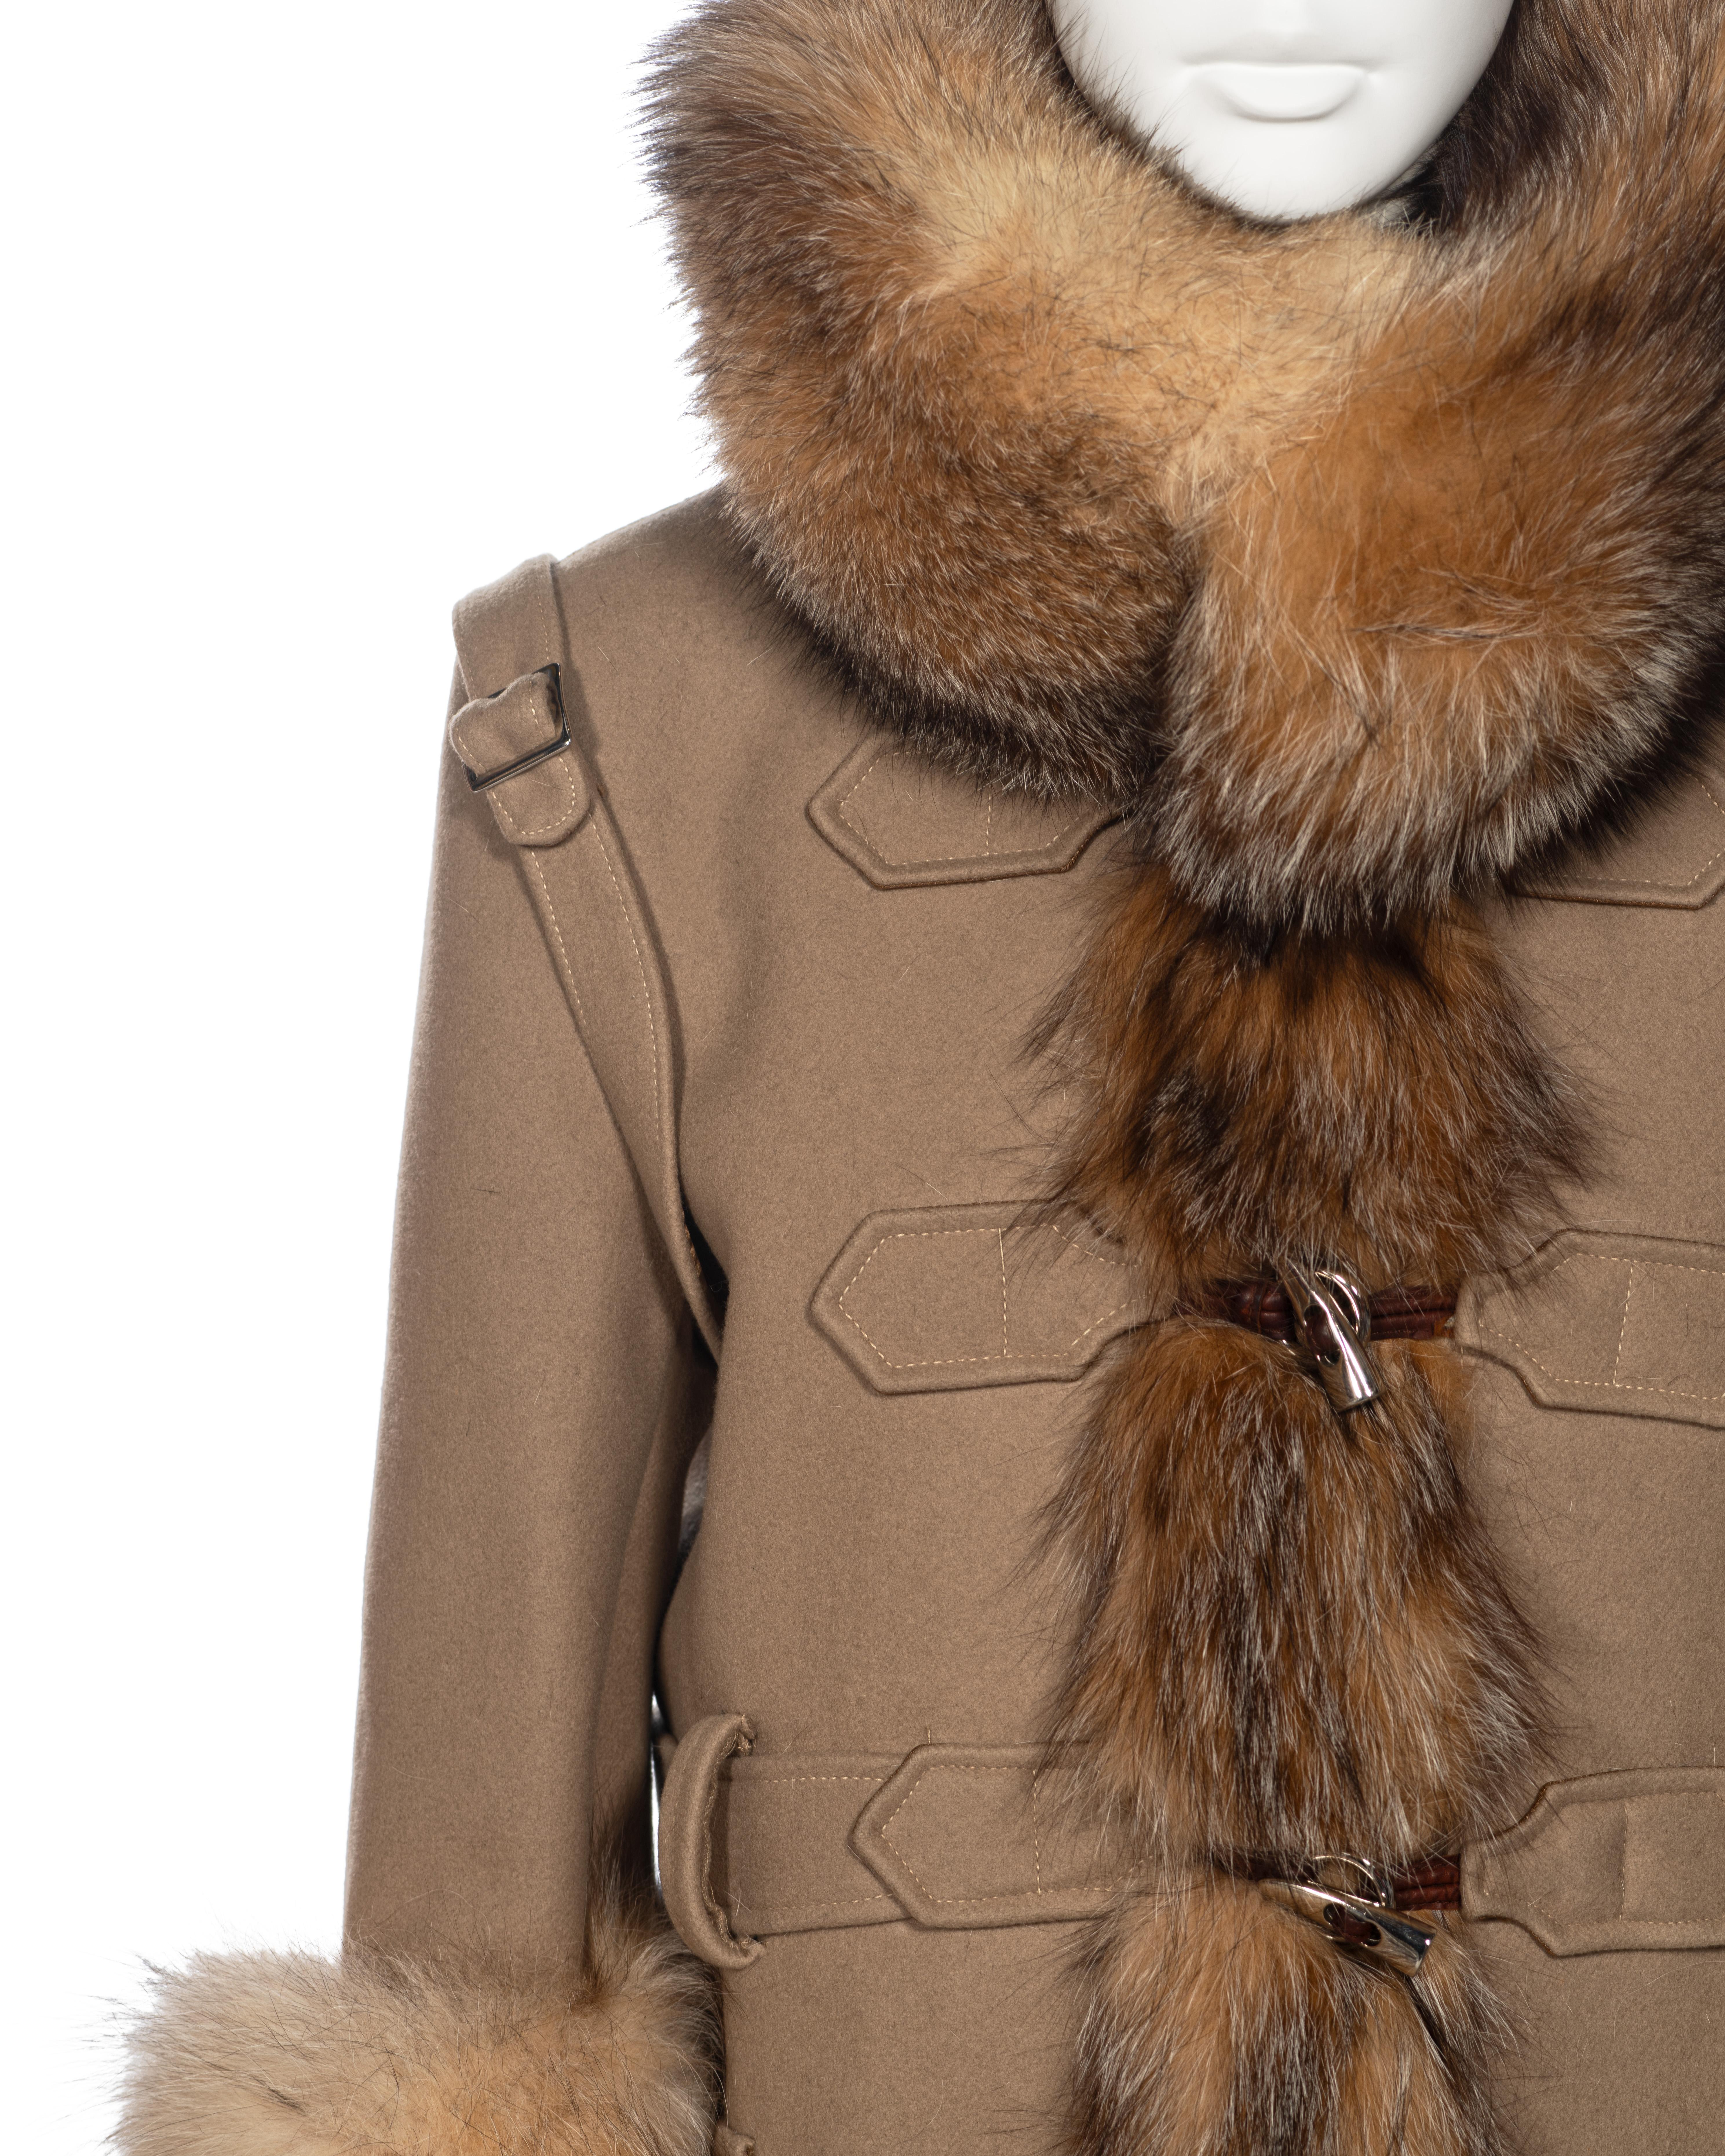 Balenciaga by Nicolas Ghesquière Fur-Trimmed Felted Wool Duffle Coat, fw 2005 For Sale 1